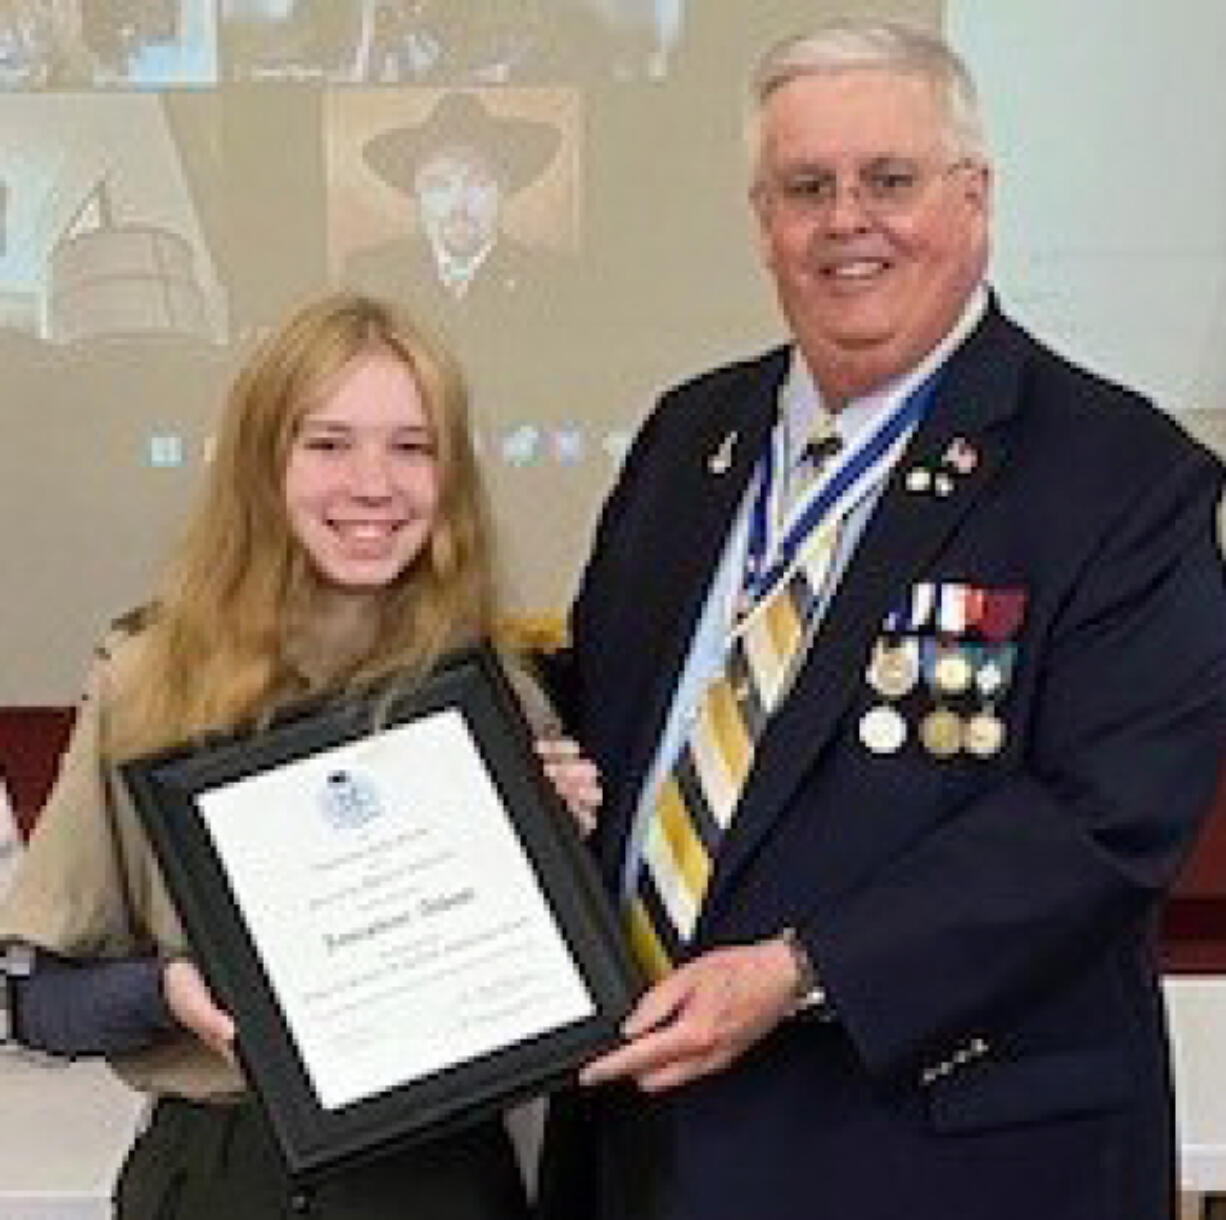 Josephine Abbott, a Seton High School freshman and Troop 5479 Eagle Scout, has won second place in the Washington State Society Sons of The American Revolution's Arthur M. & Berdena King Eagle Essay competition.